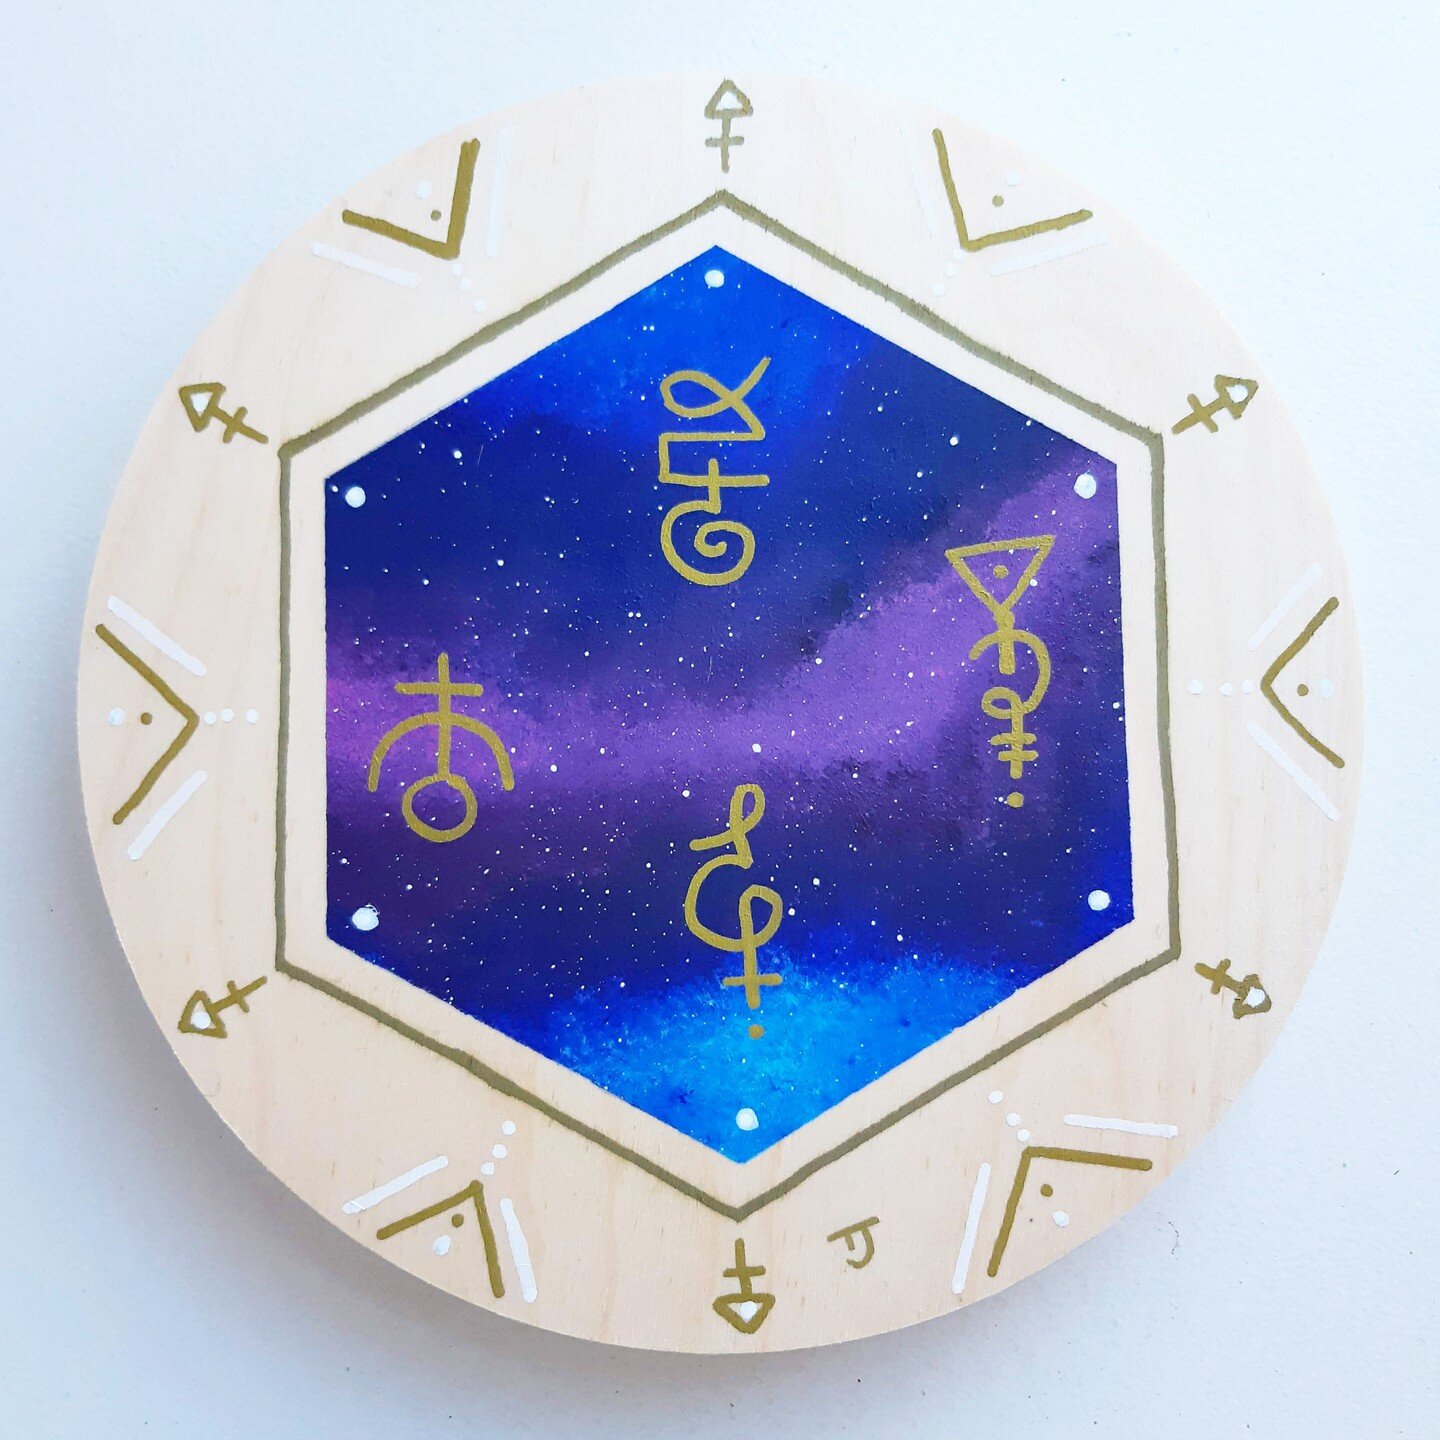 This beauty went to its home yesterday. Another beautiful galactic crystal grid completed. And I am finding changing the direction of the symbols allows a different meaning and activation!

This went to a dear soul sister to help ground the new energ